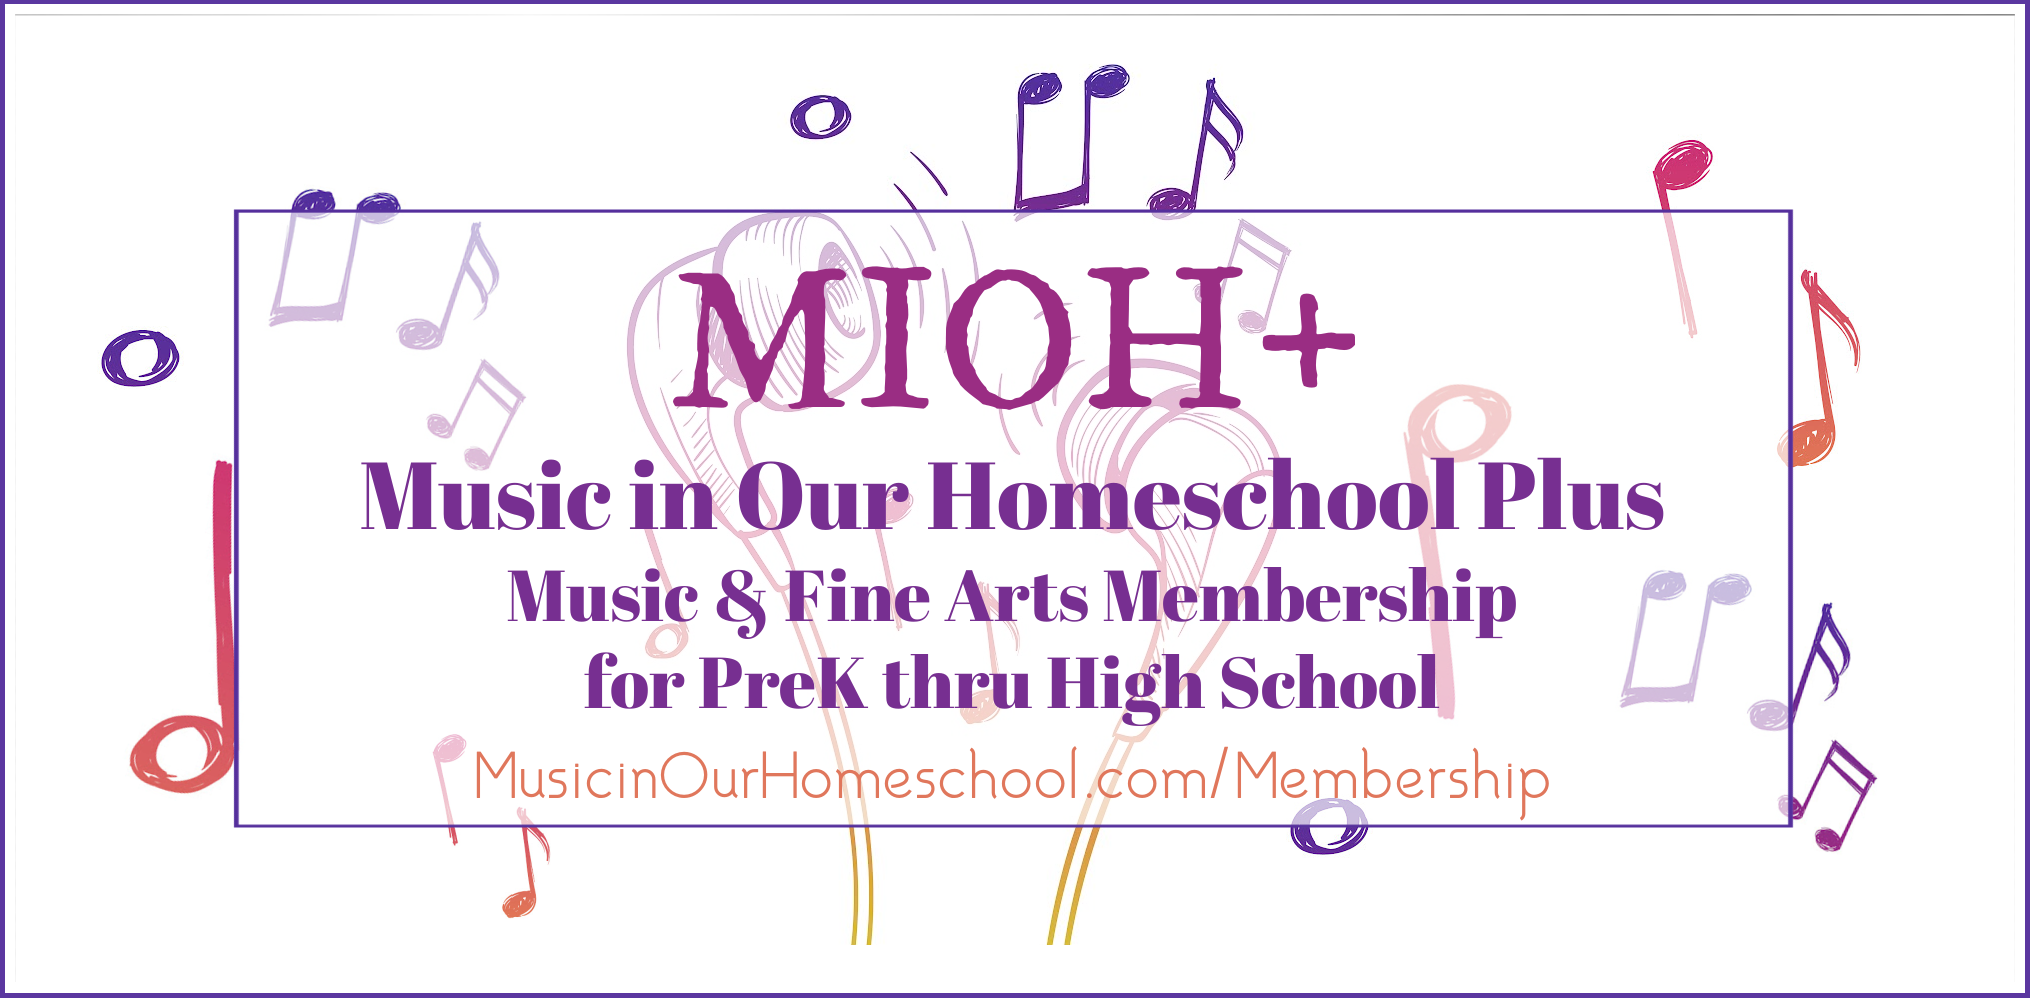 The new Music in Our Homeschool Plus music and fine arts membership for preschool through high school from Music in Our Homeschool